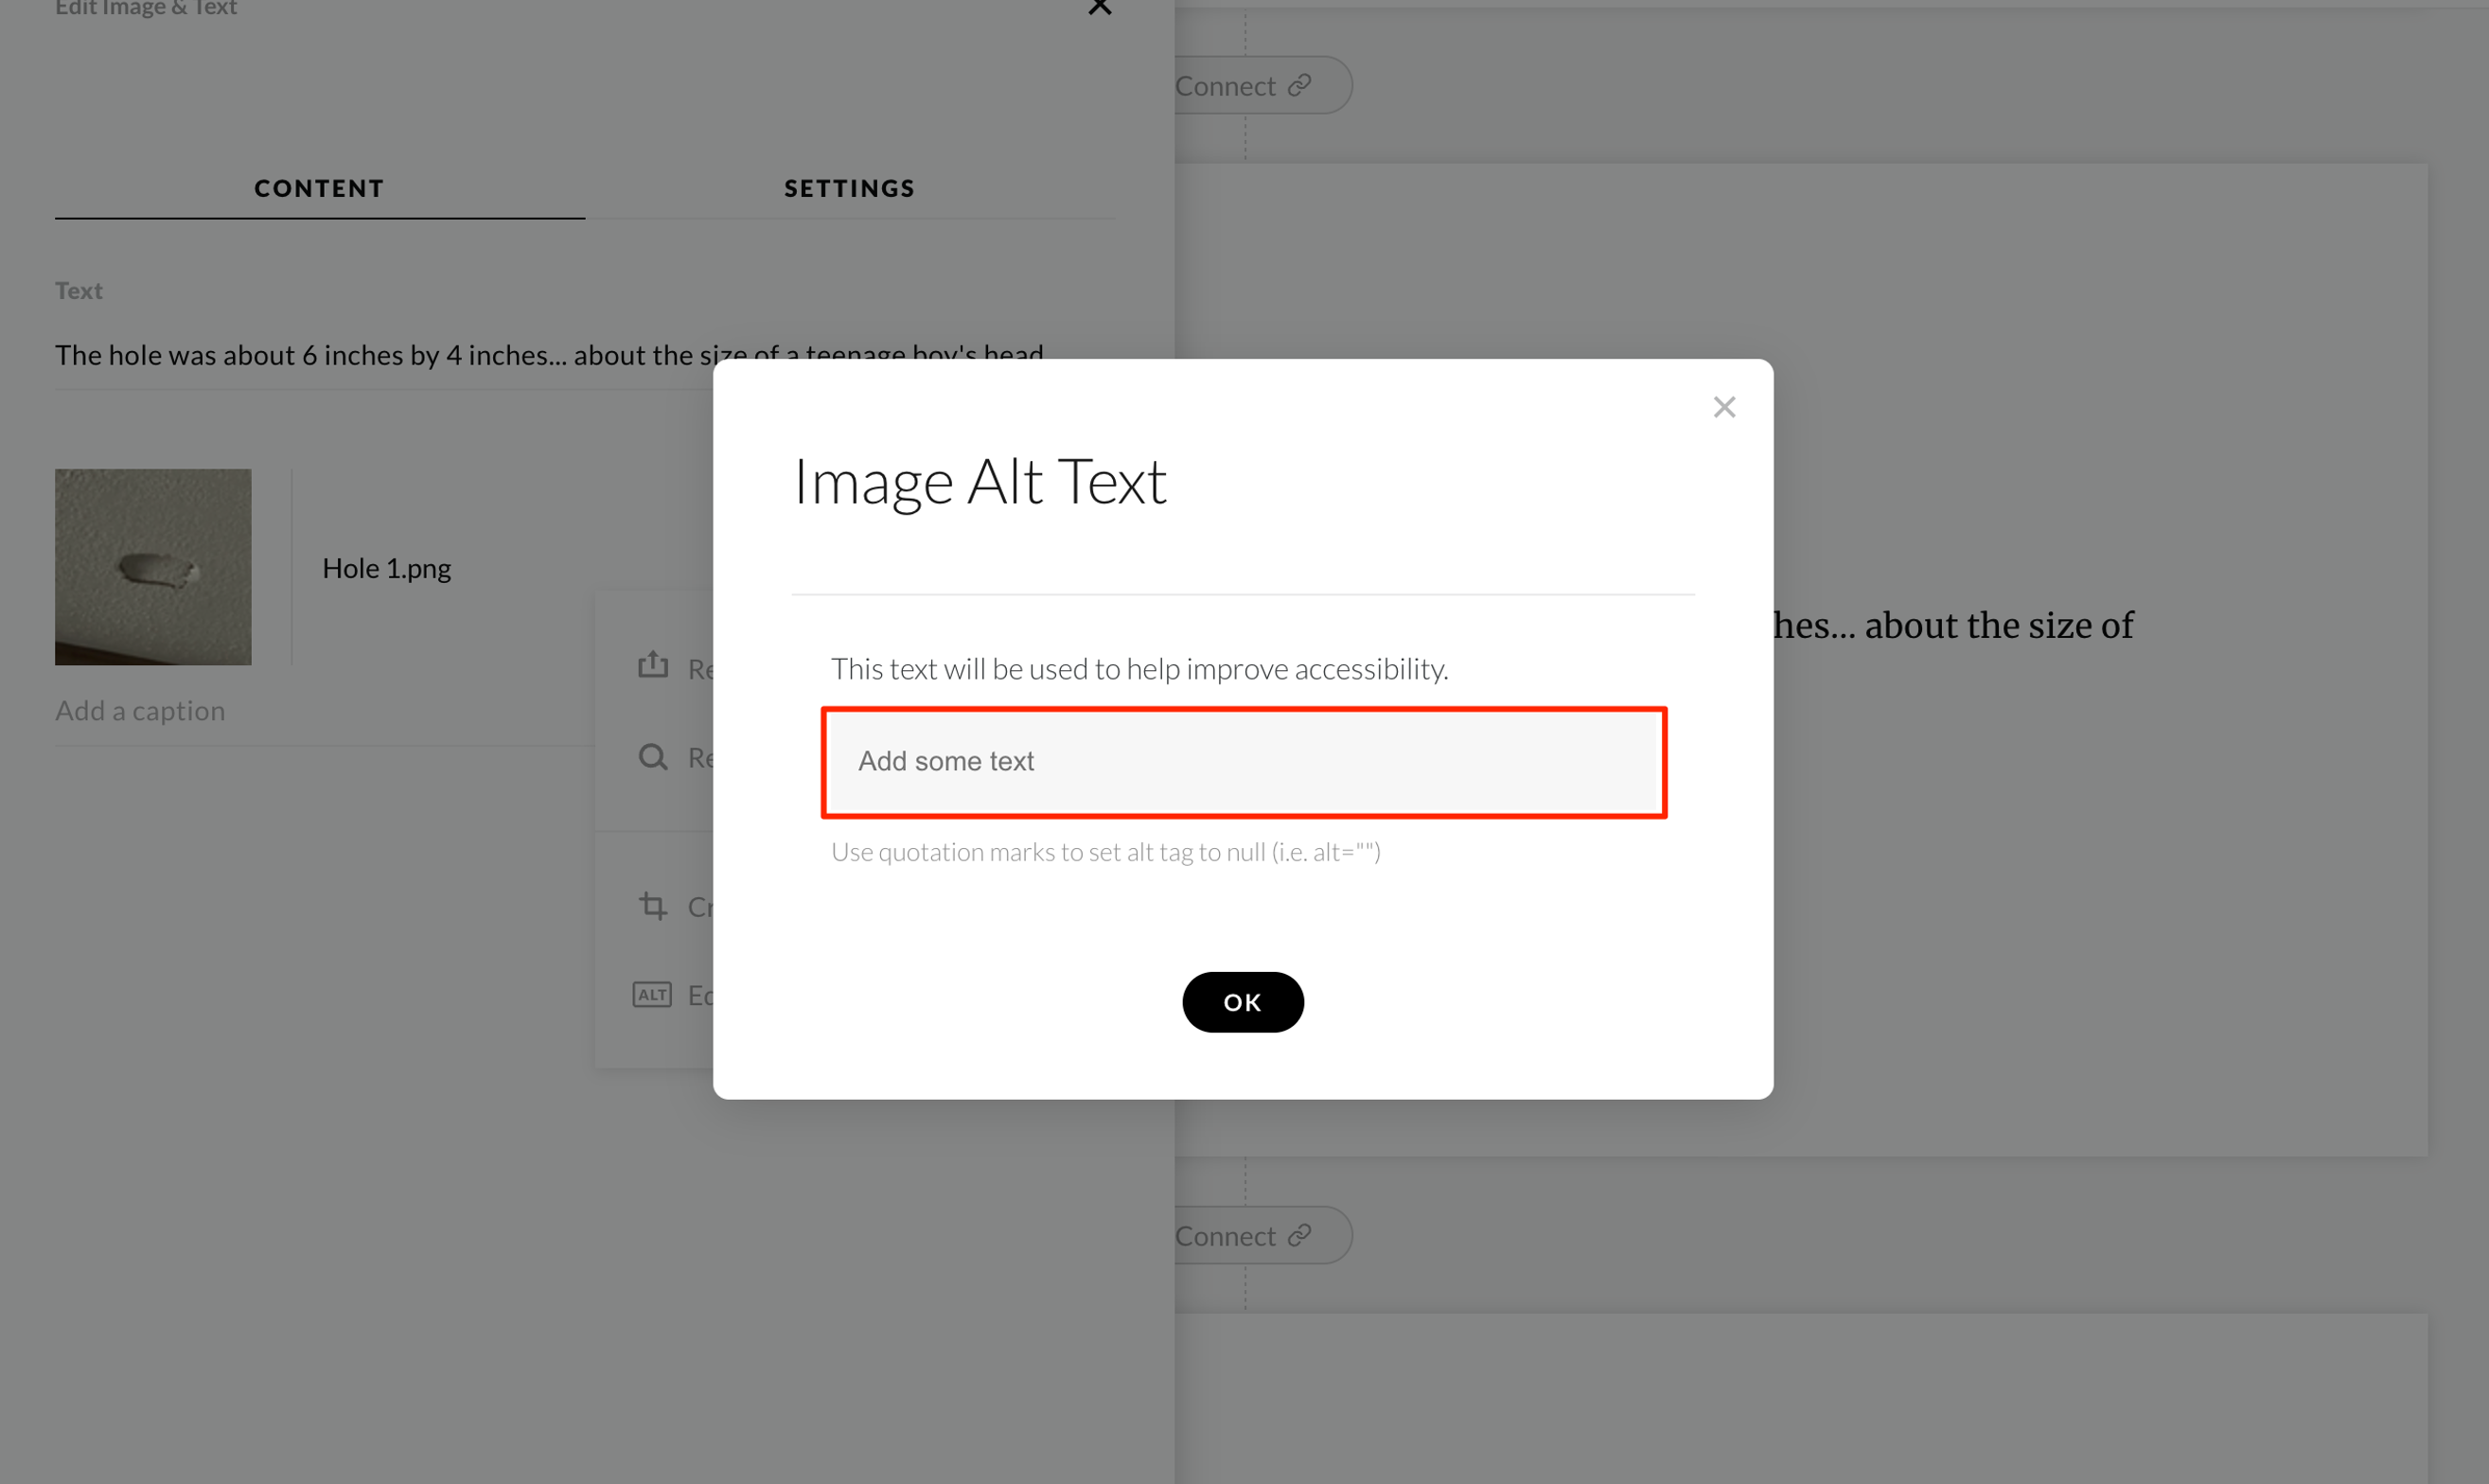 Screenshot of Articulate Rise “Image Alt Text” dialogue box with “Edit alt tag” highlighted.